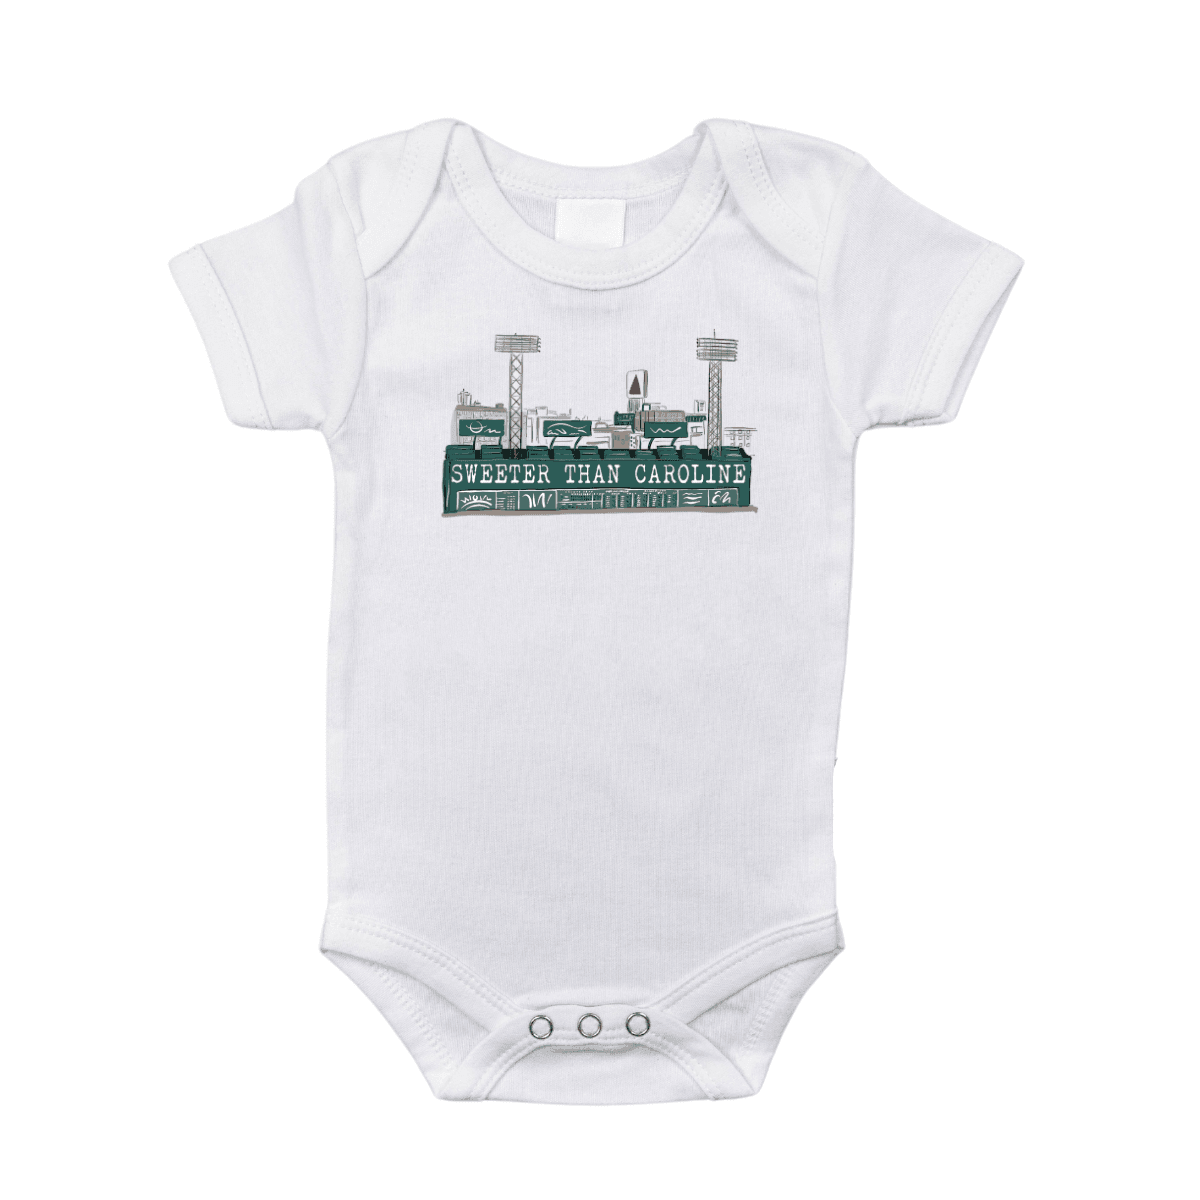 A white baby onesie with a Massachusetts theme showing "Sweeter than Caroline" printed on Fenway Park's Green Monster